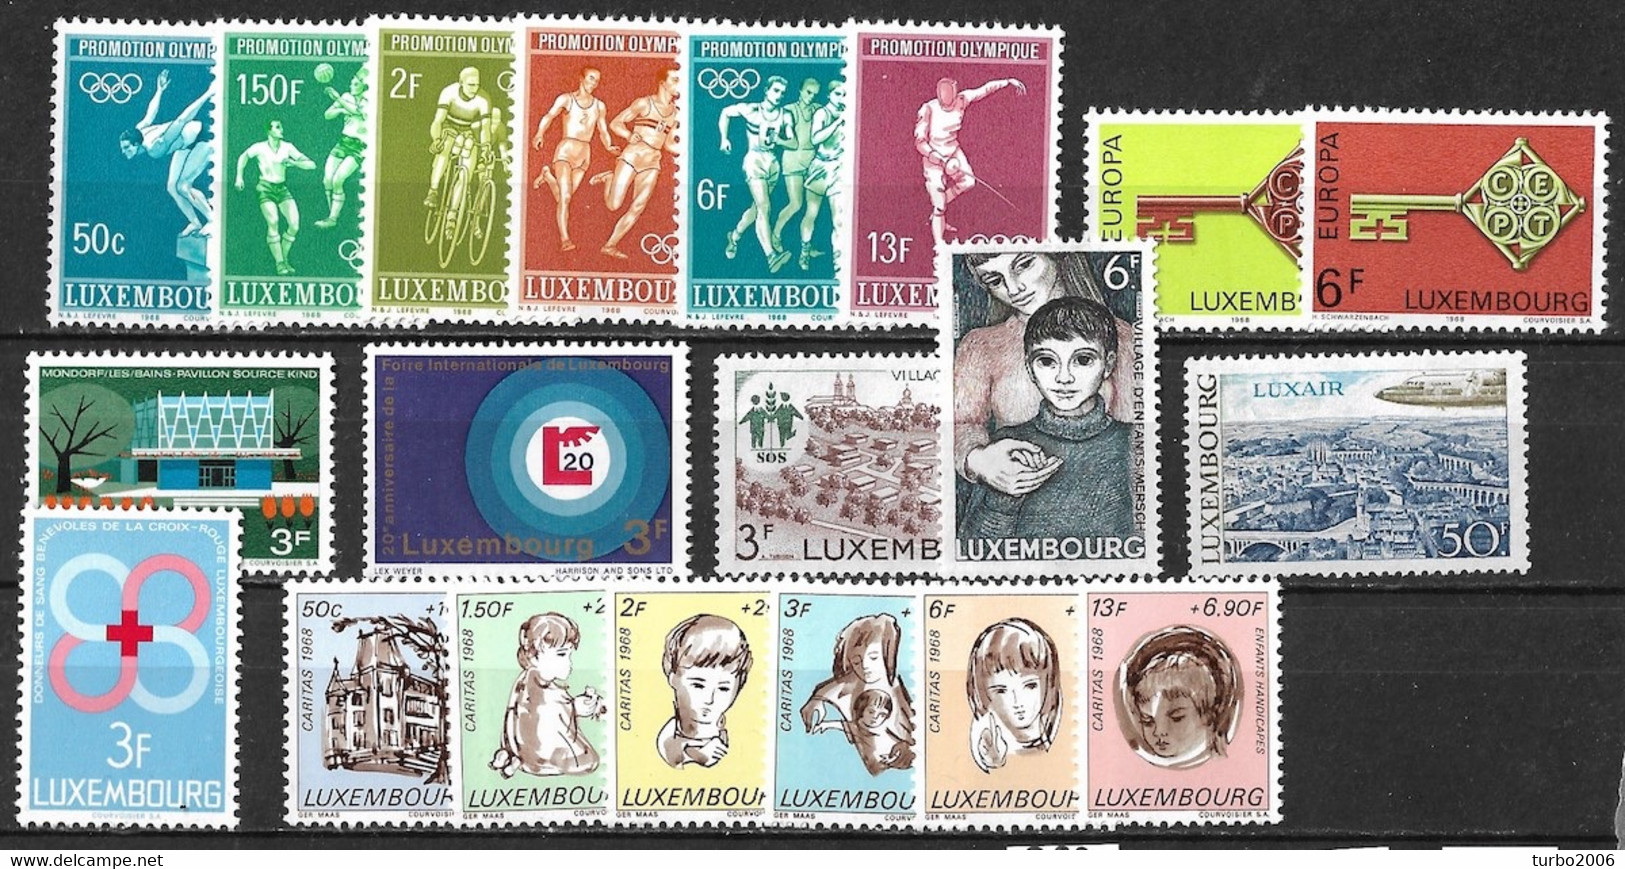 Luxemburg 1968 All Sets Complete MNH Michel 765 / 784 - Años Completos